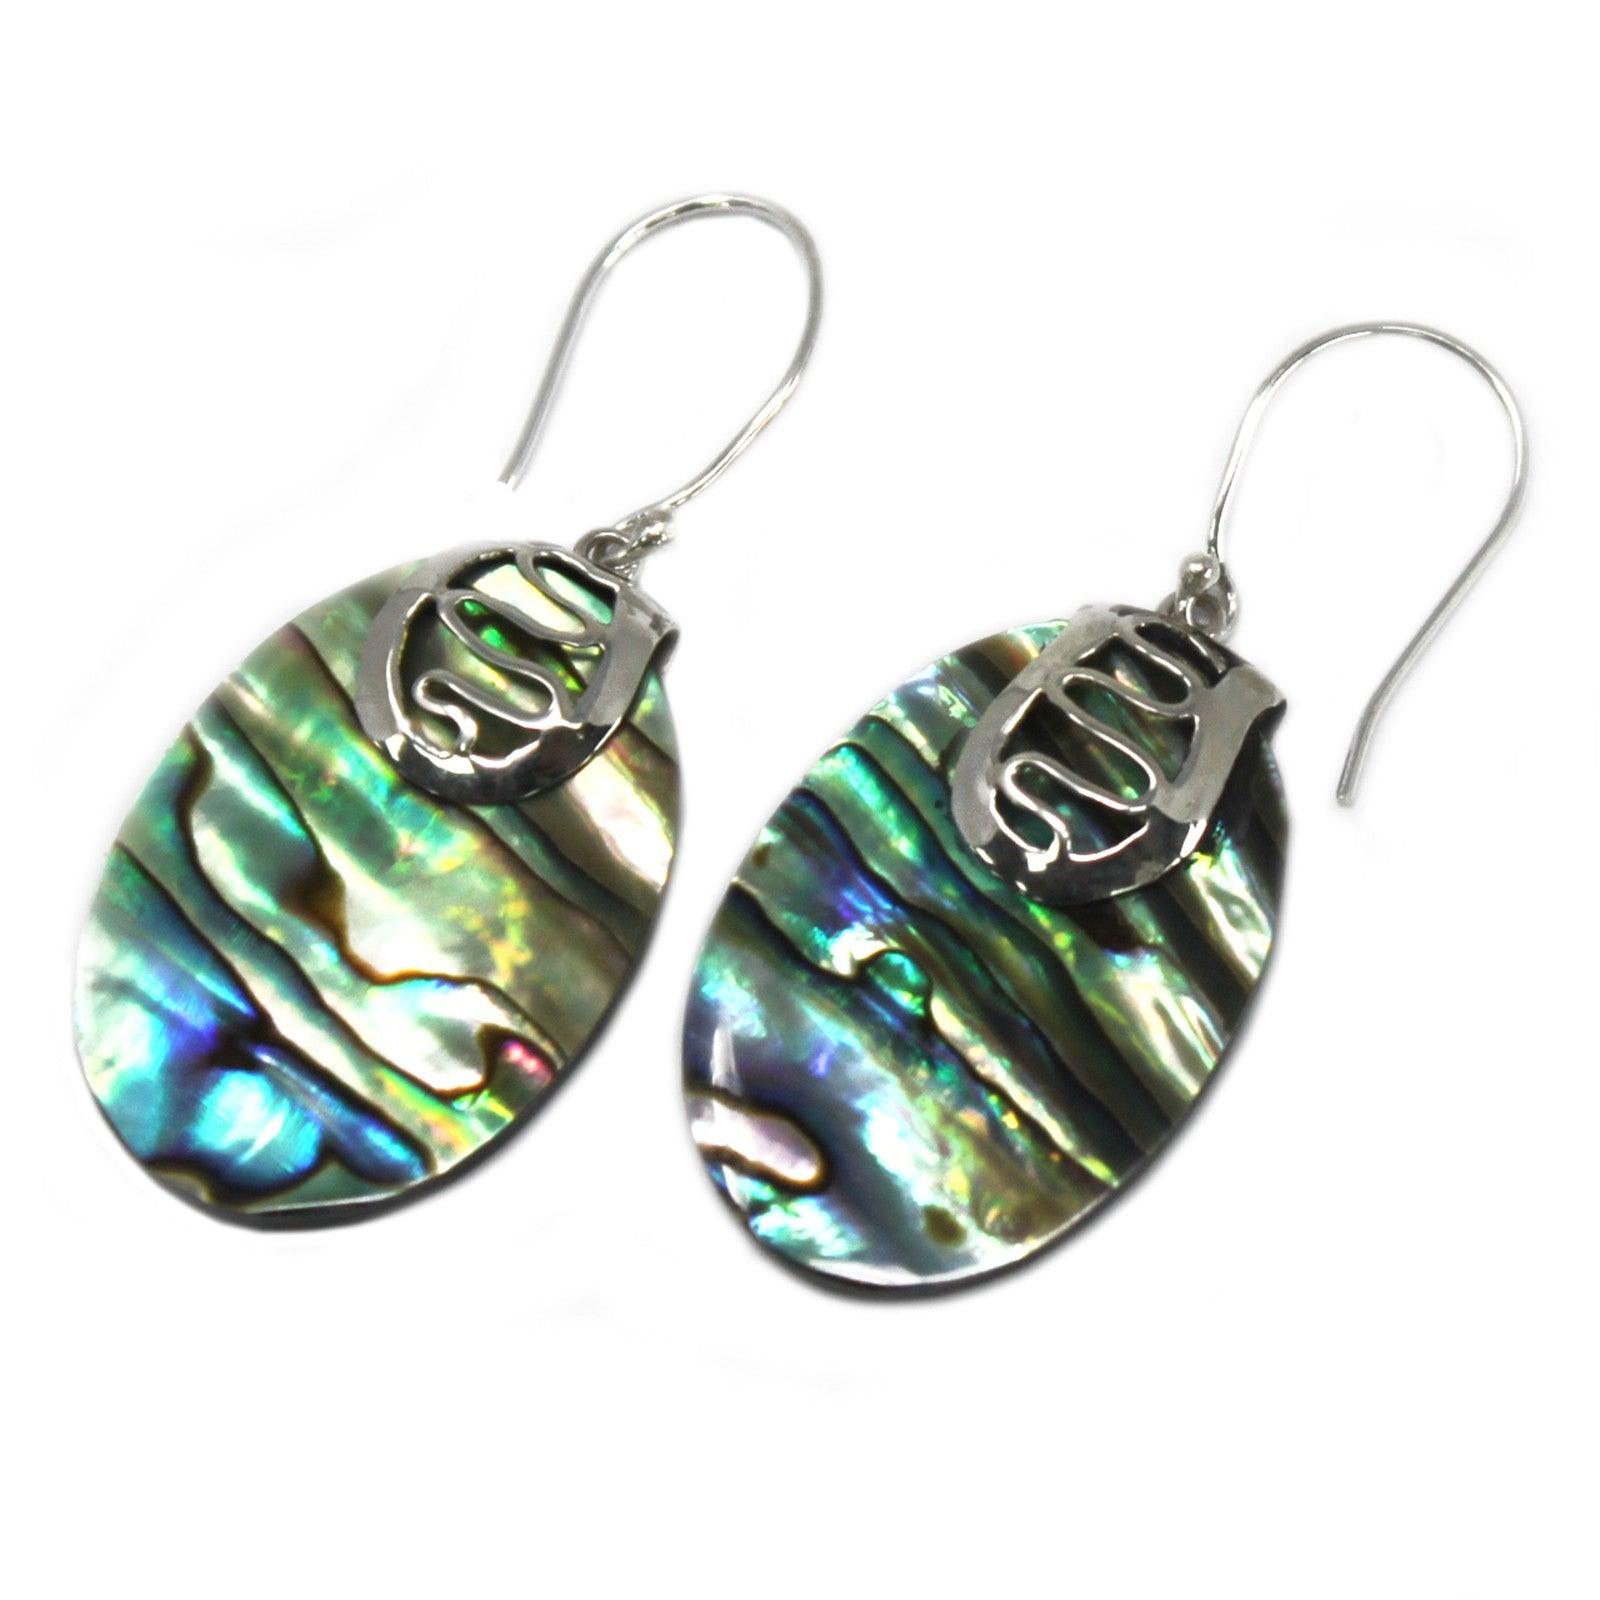 Shell & Silver Earrings - Abalone - DuvetDay.co.uk